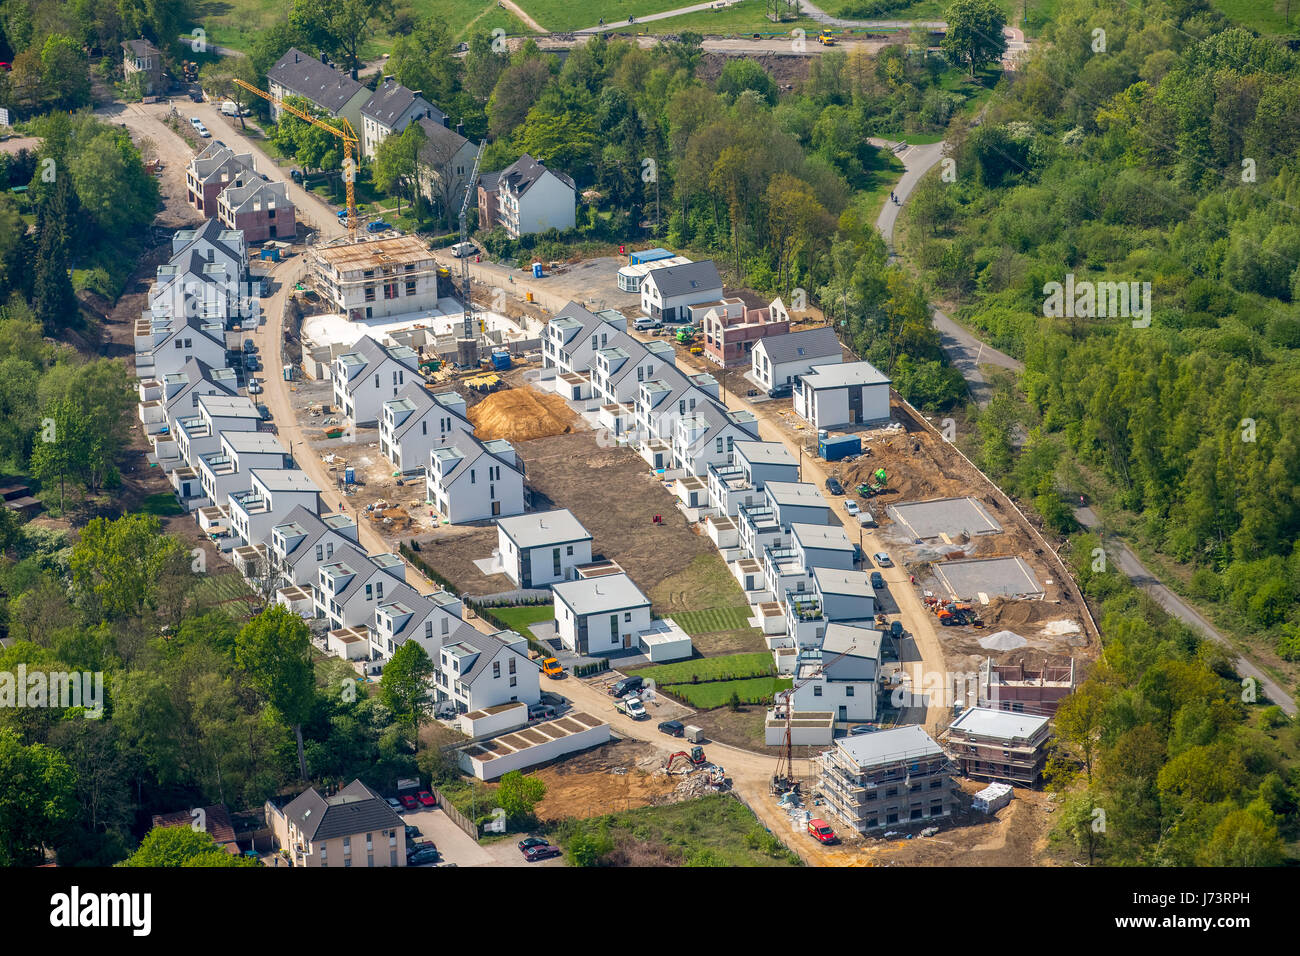 New construction in the form of an ellipse, An der Holtbrügge, Springorum cycle path, family houses, Bochum, Ruhr area, North Rhine-Westphalia, German Stock Photo